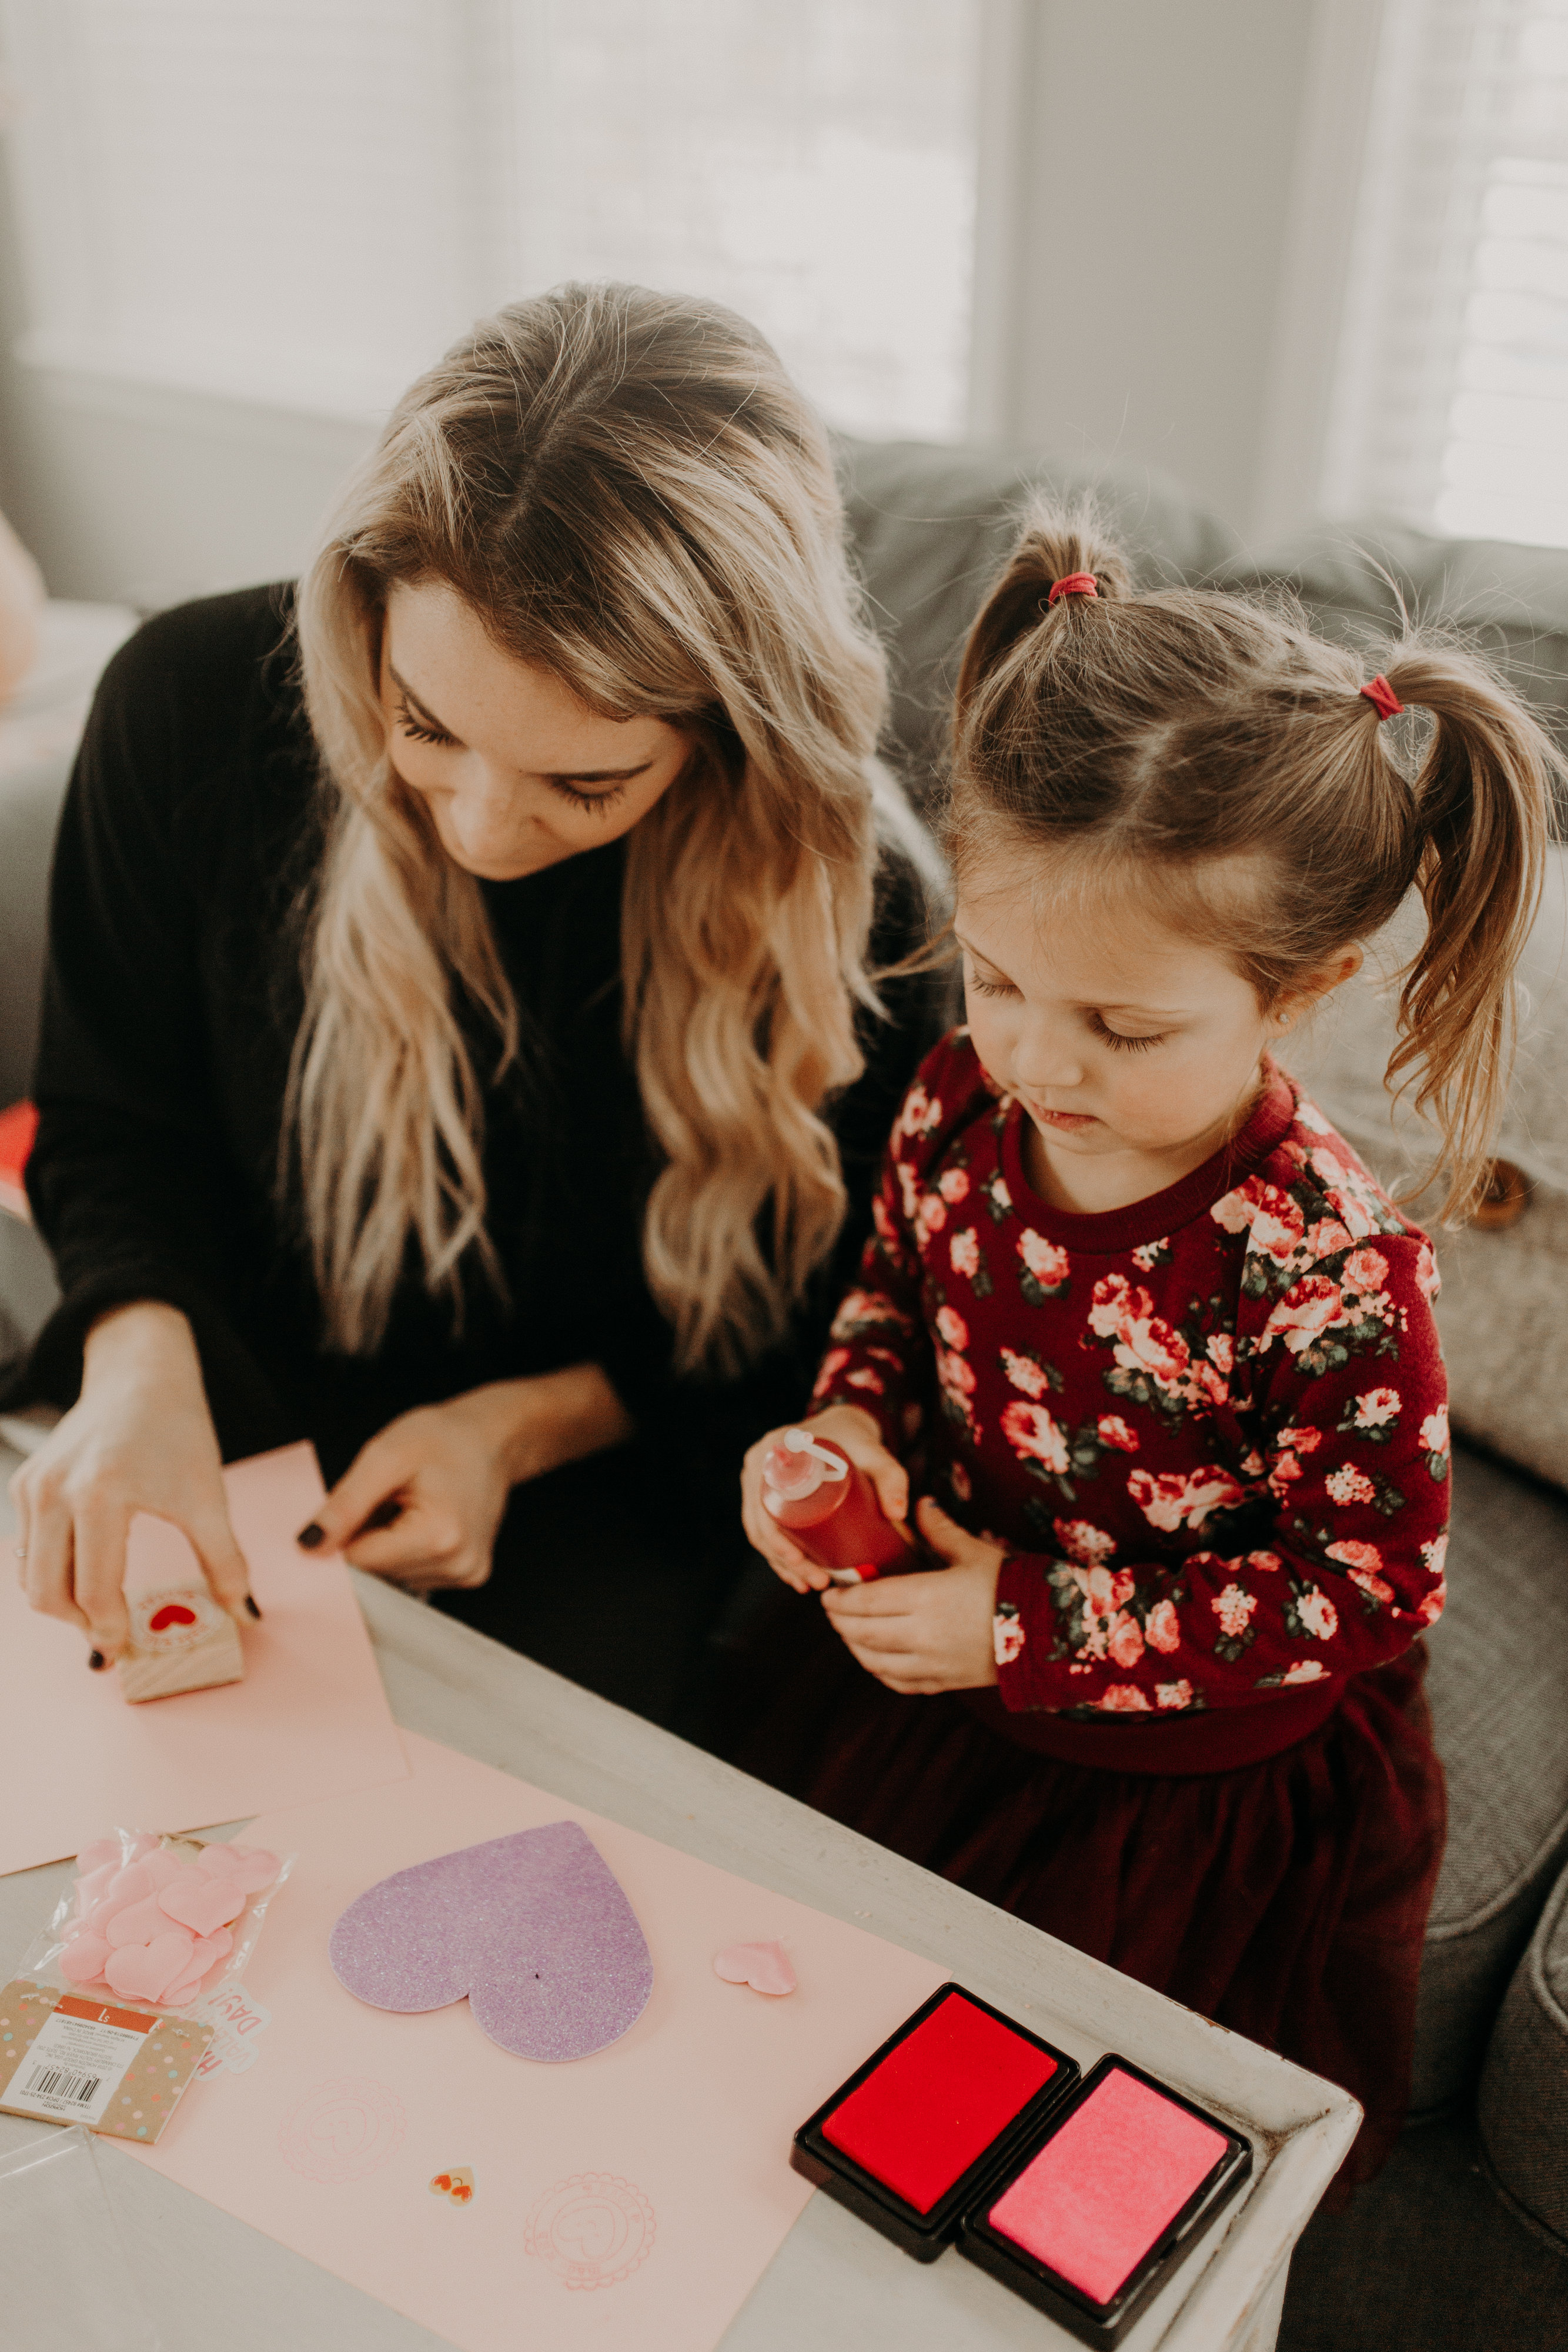 Making cards: Valentine's Day activities to do with your kids